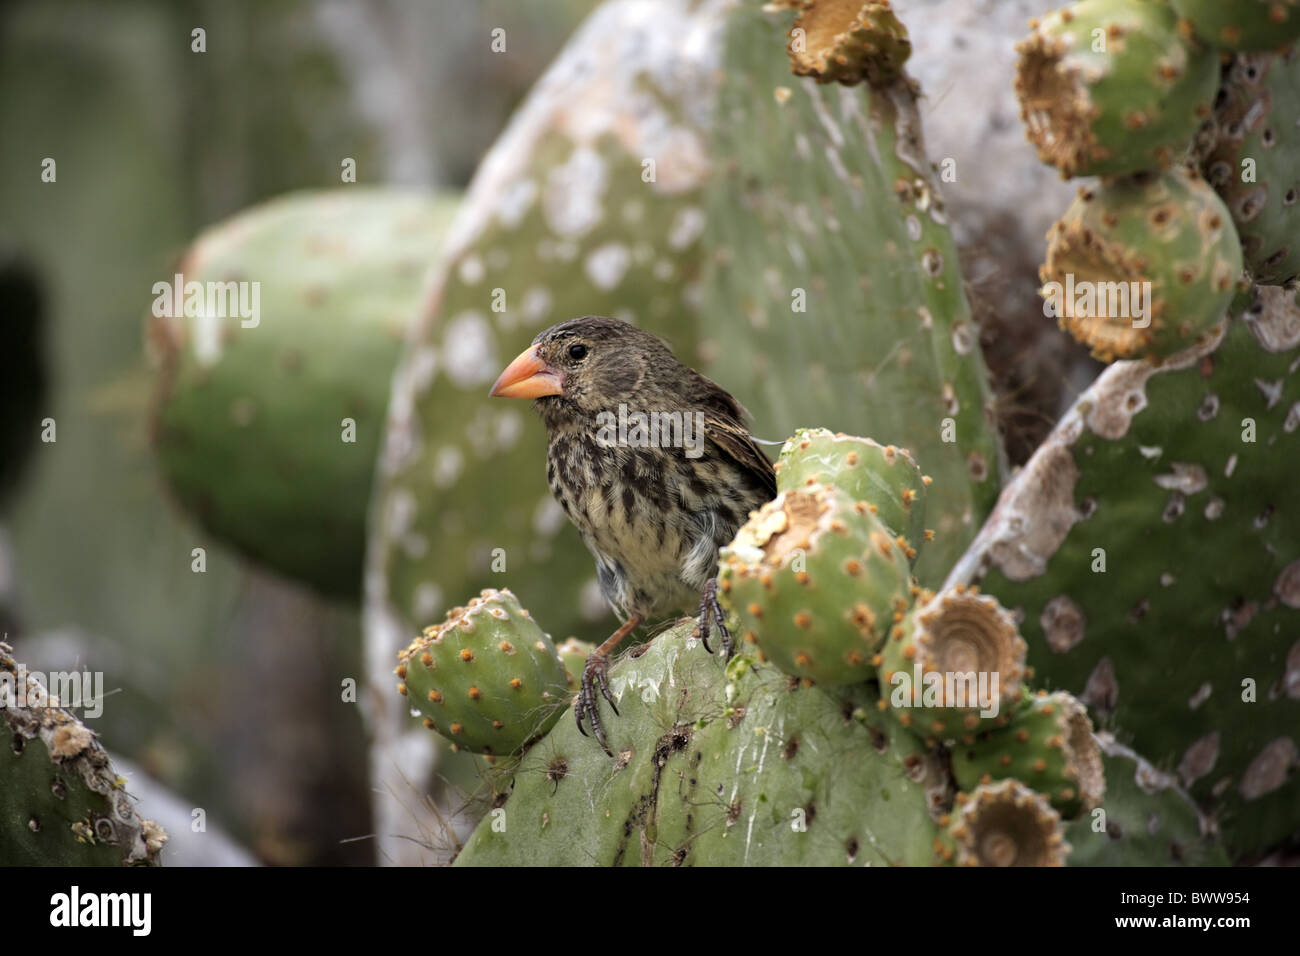 Medium Ground-finch (Geospiza fortis) adult, perched on cactus, Galapagos Islands Stock Photo